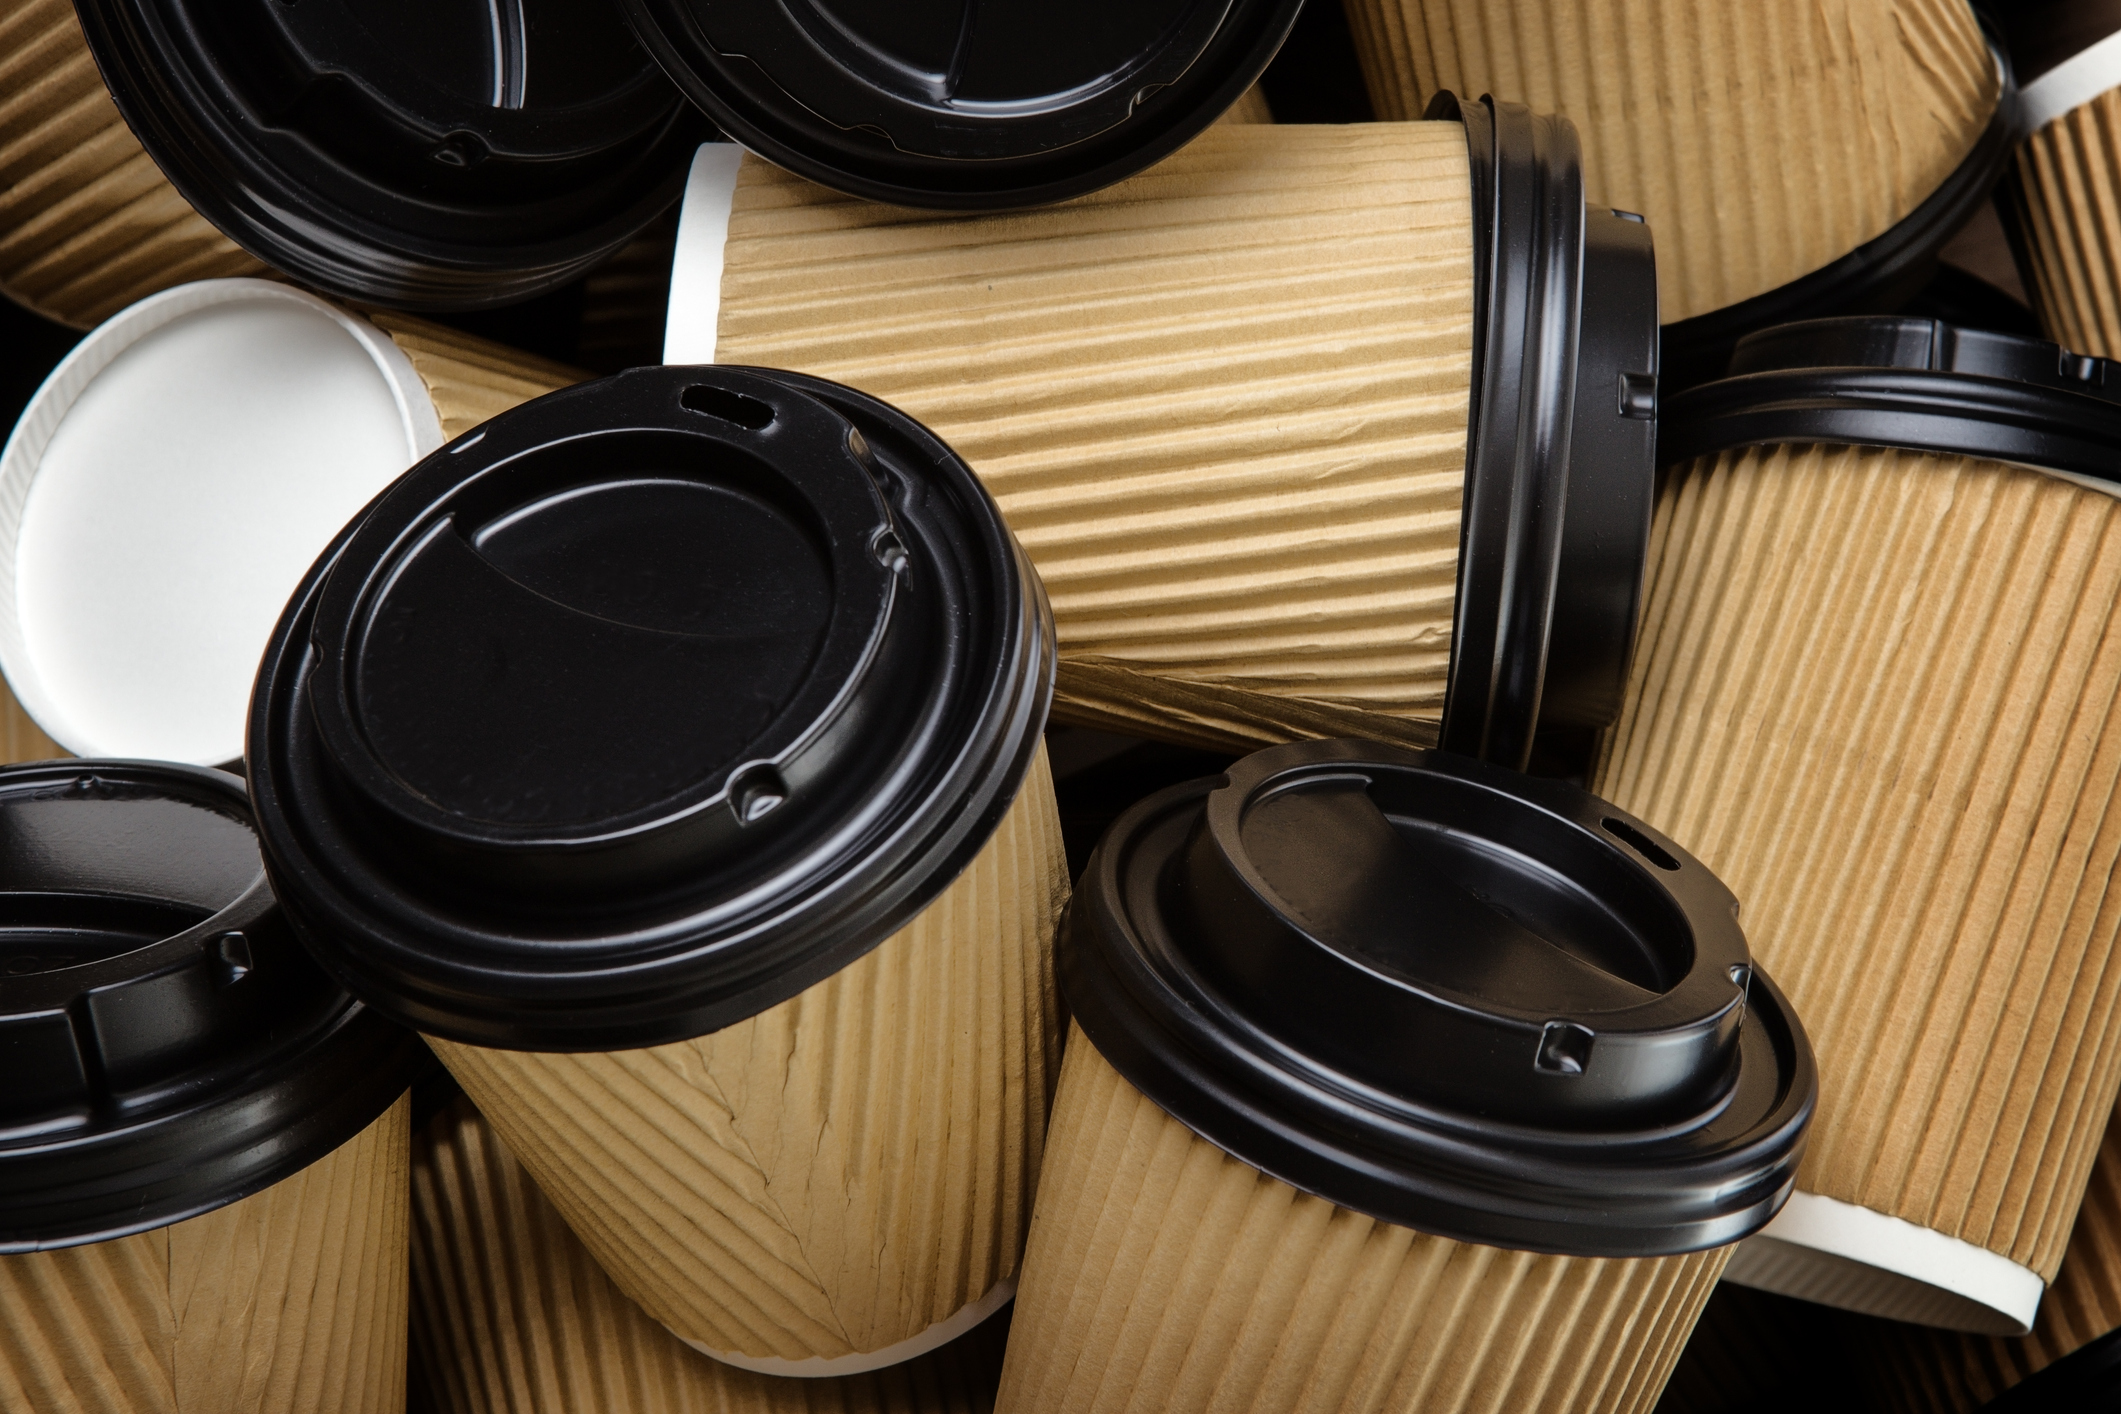 Take-out coffee cups